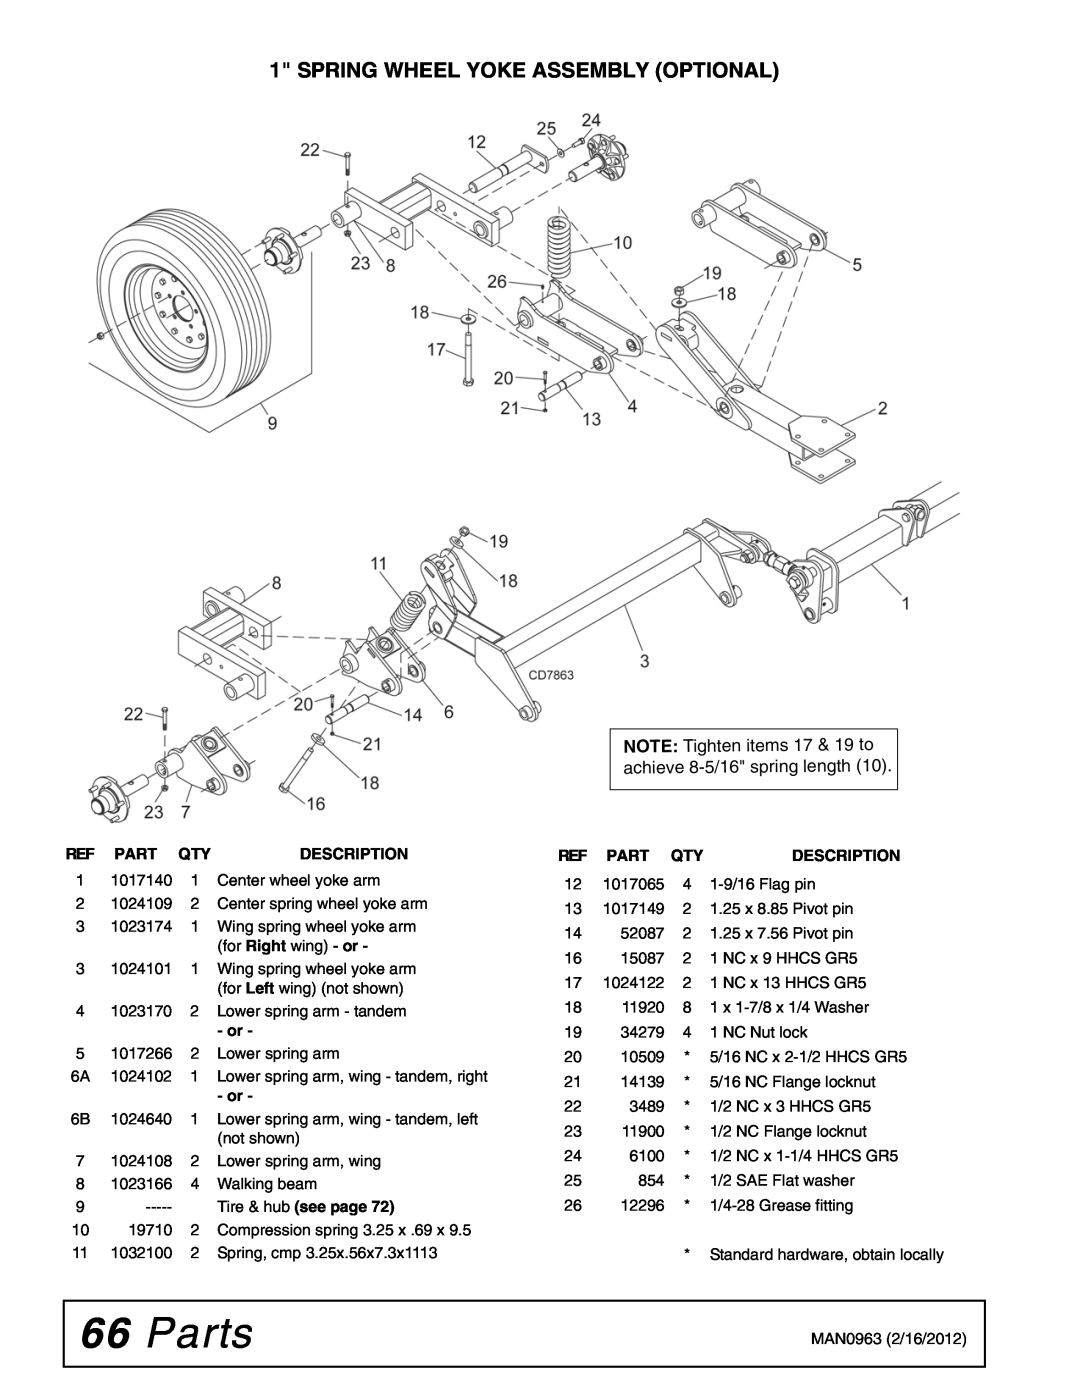 Woods Equipment BW126XHDQ, BW180XHDQ manual Parts, Spring Wheel Yoke Assembly Optional, Description, for Right wing - or 